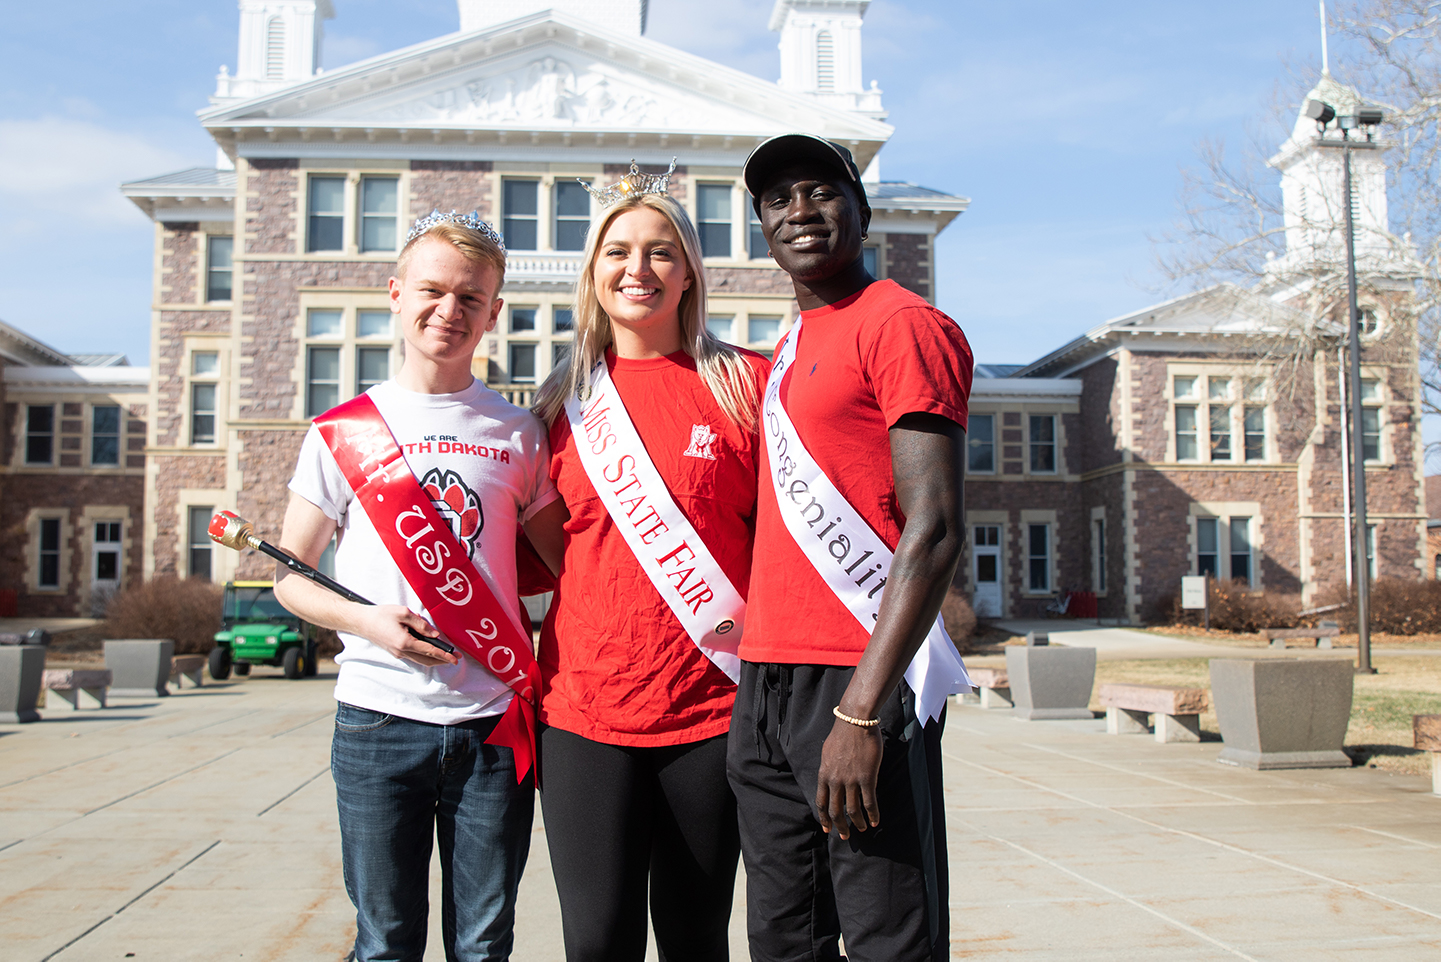 Mr. USD pageant creates camaraderie, donates proceeds to charity